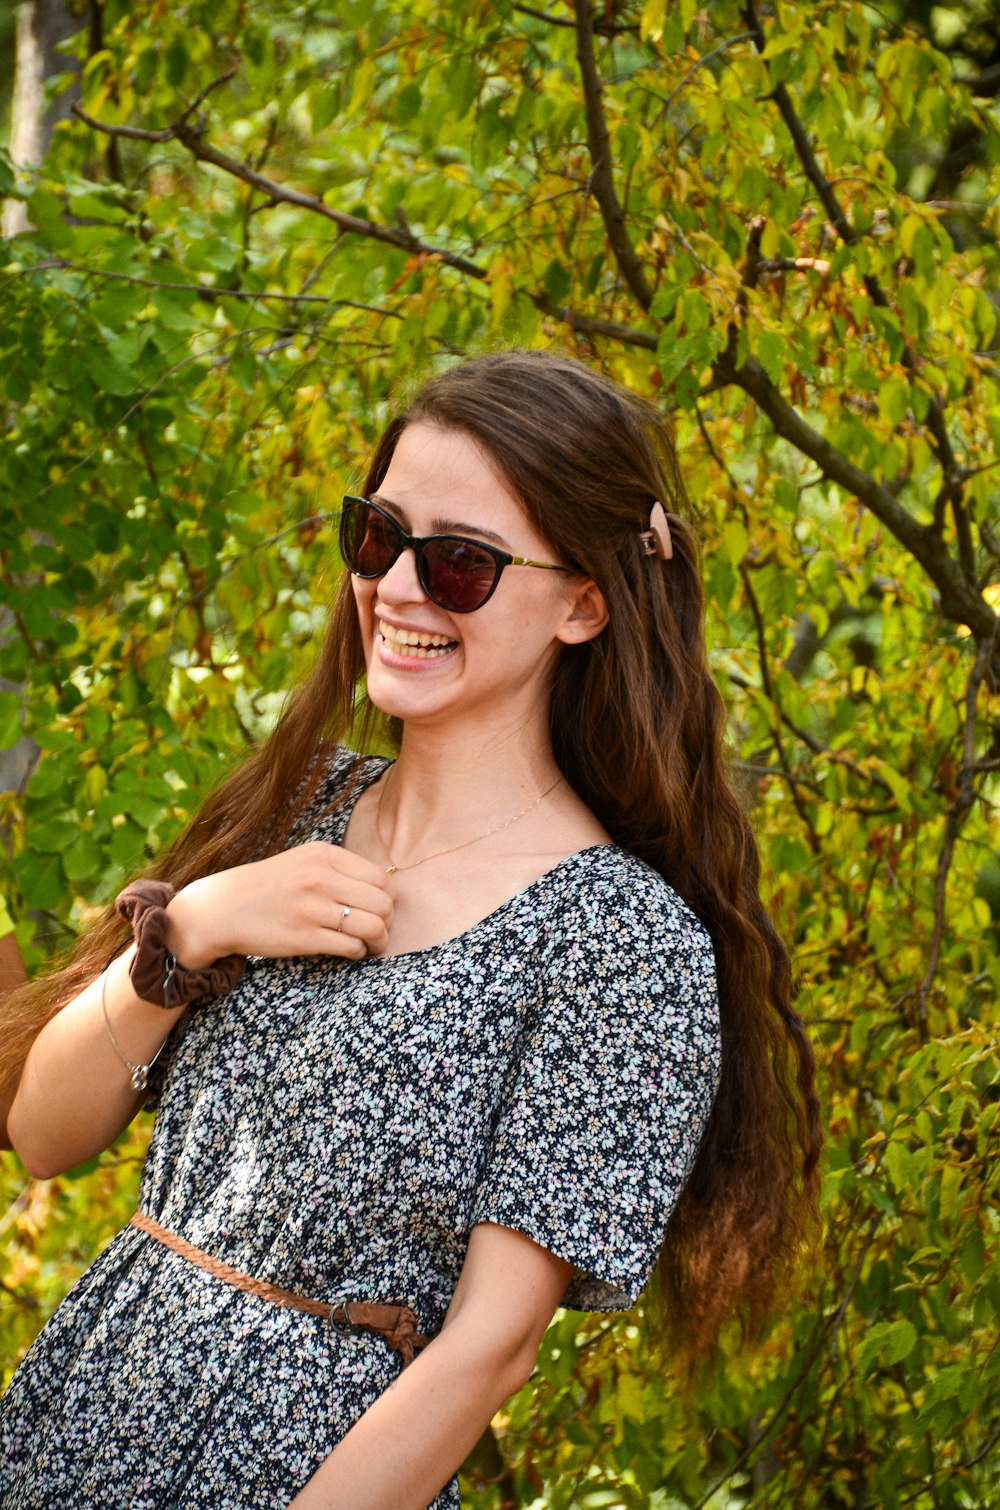 a woman in a dress and sunglasses smiling